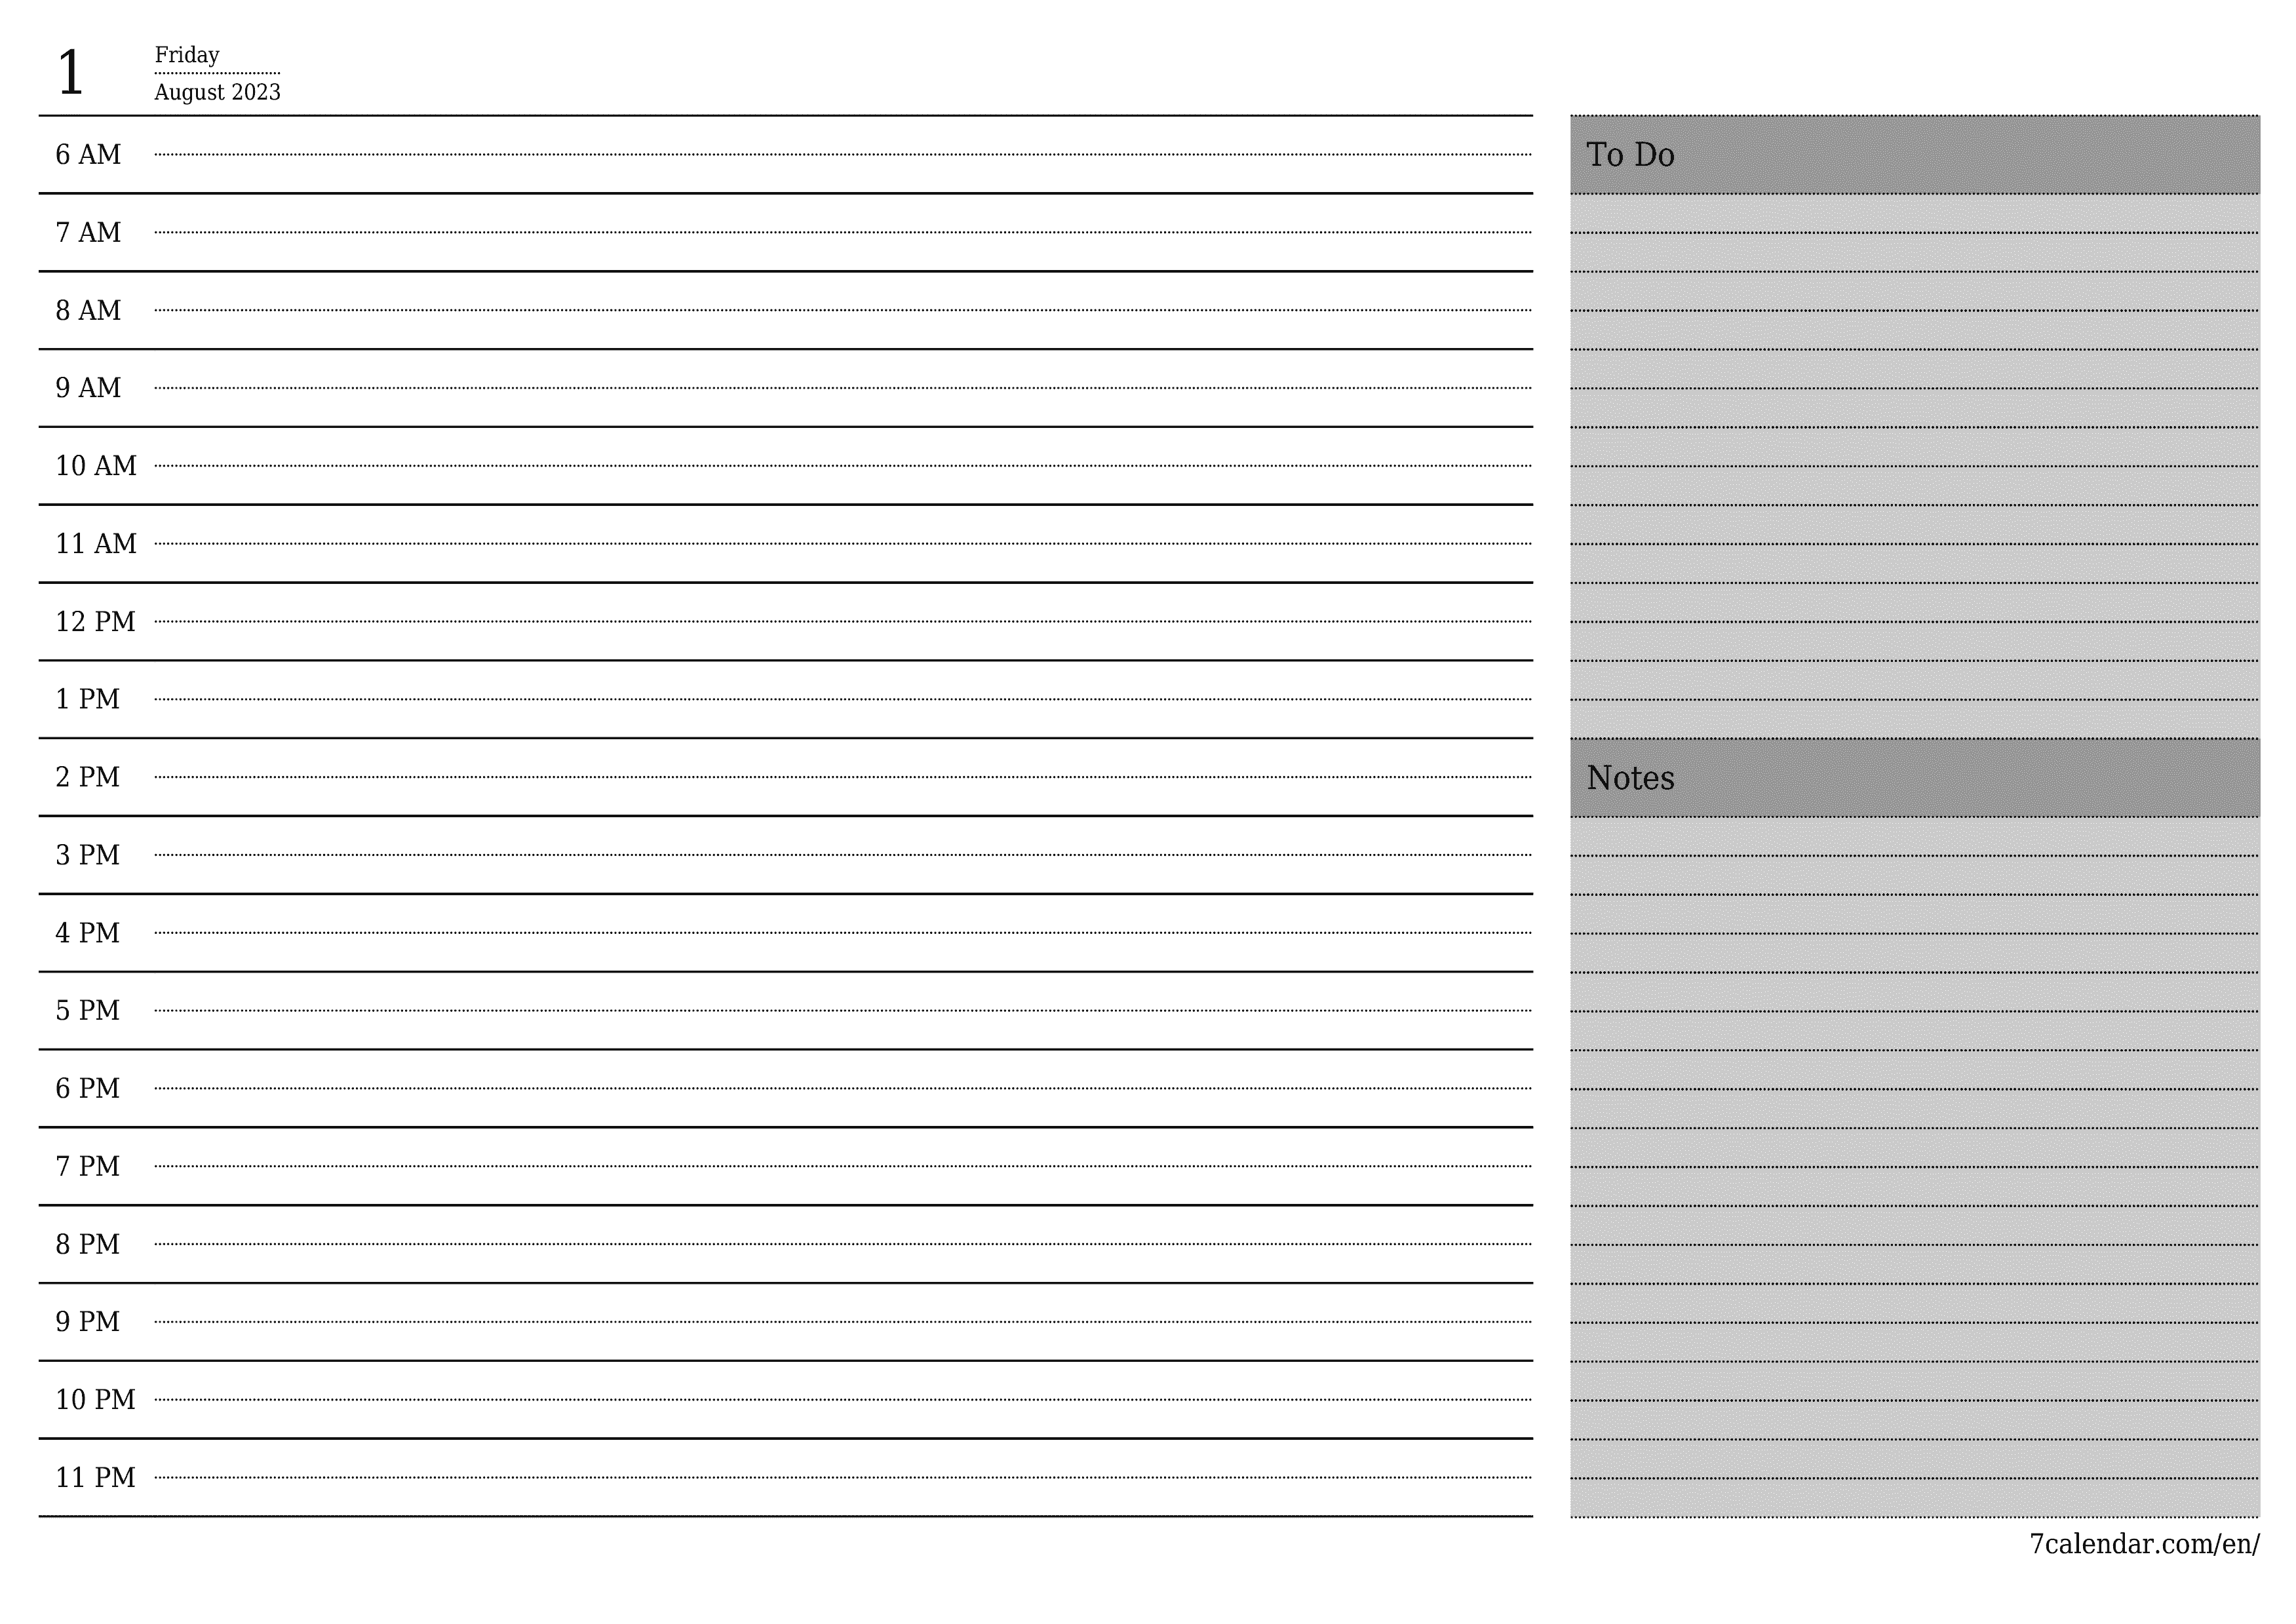 Blank daily calendar planner for day August 2023 with notes, save and print to PDF PNG English - 7calendar.com